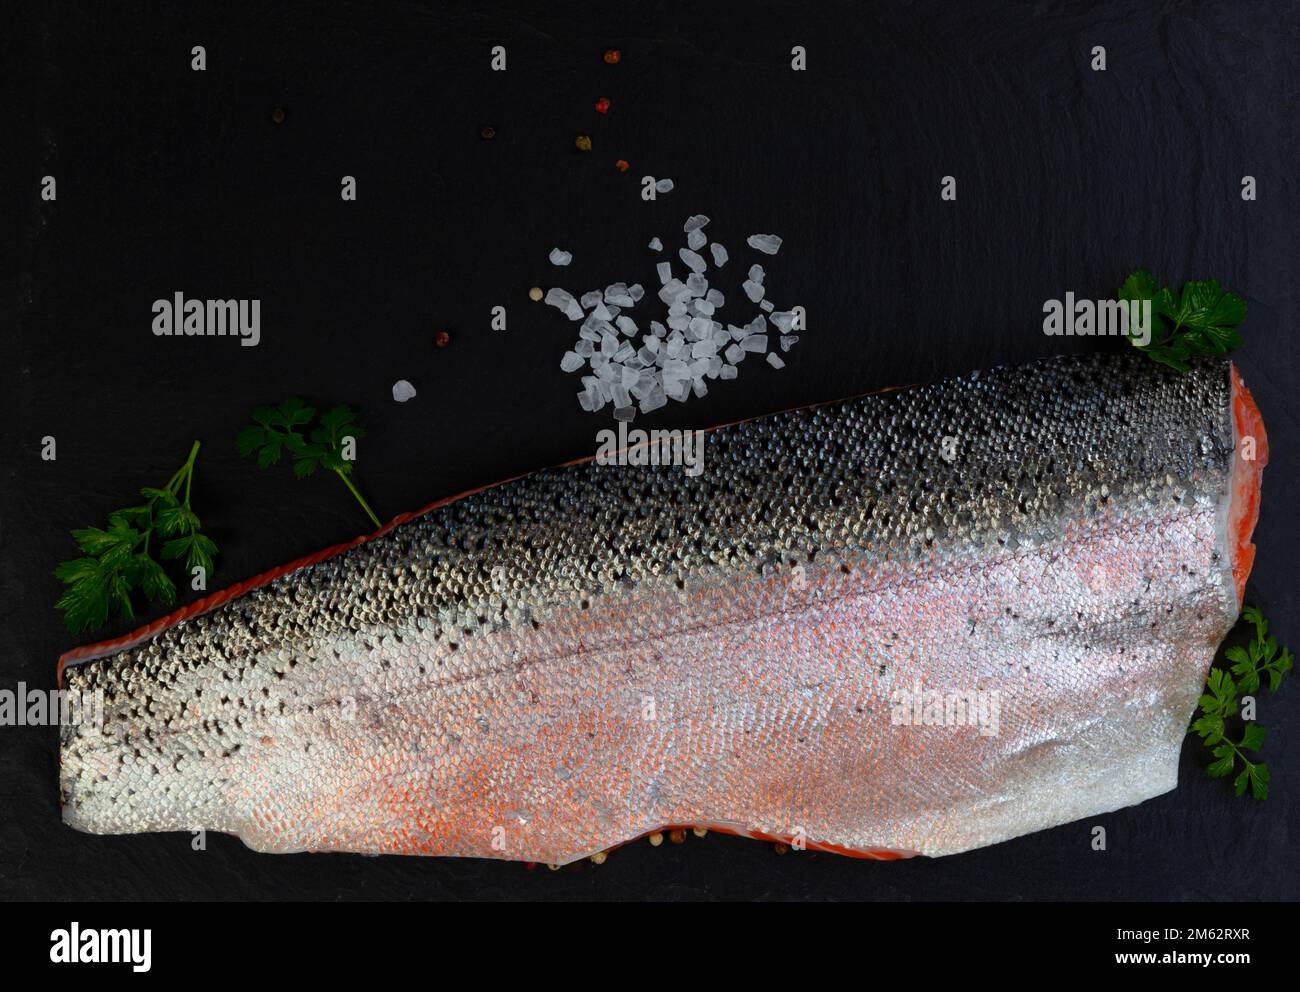 Salmon trout fillet, skin side up, on natural dark stone with parsley and salt seasonings in flay lay format Stock Photo